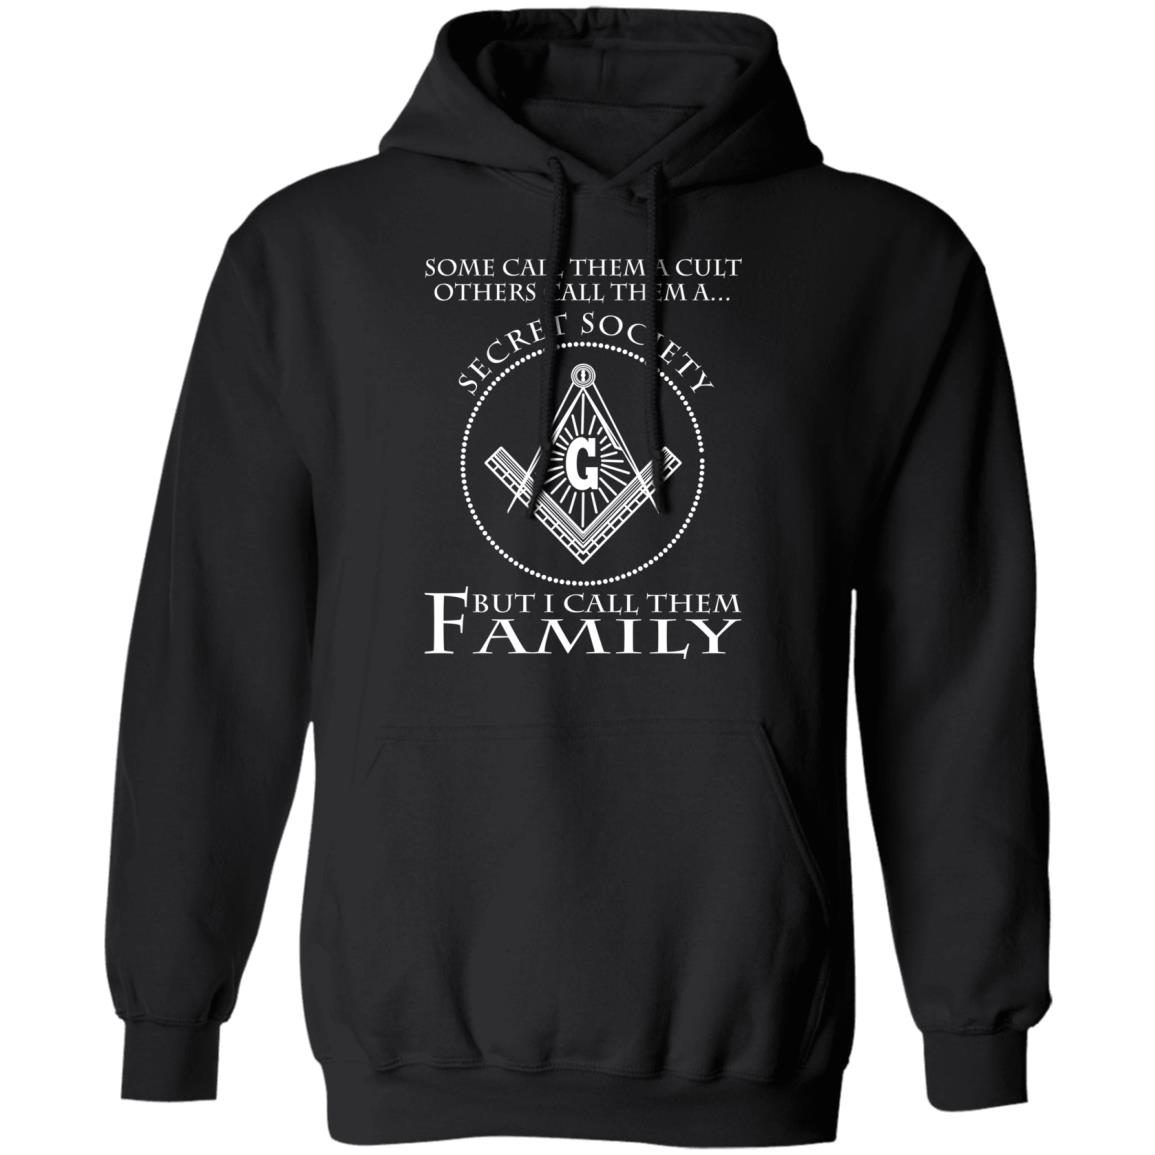 Some Call Them A Cult Others Call Them A Secret Society But I Call Them Family shirt